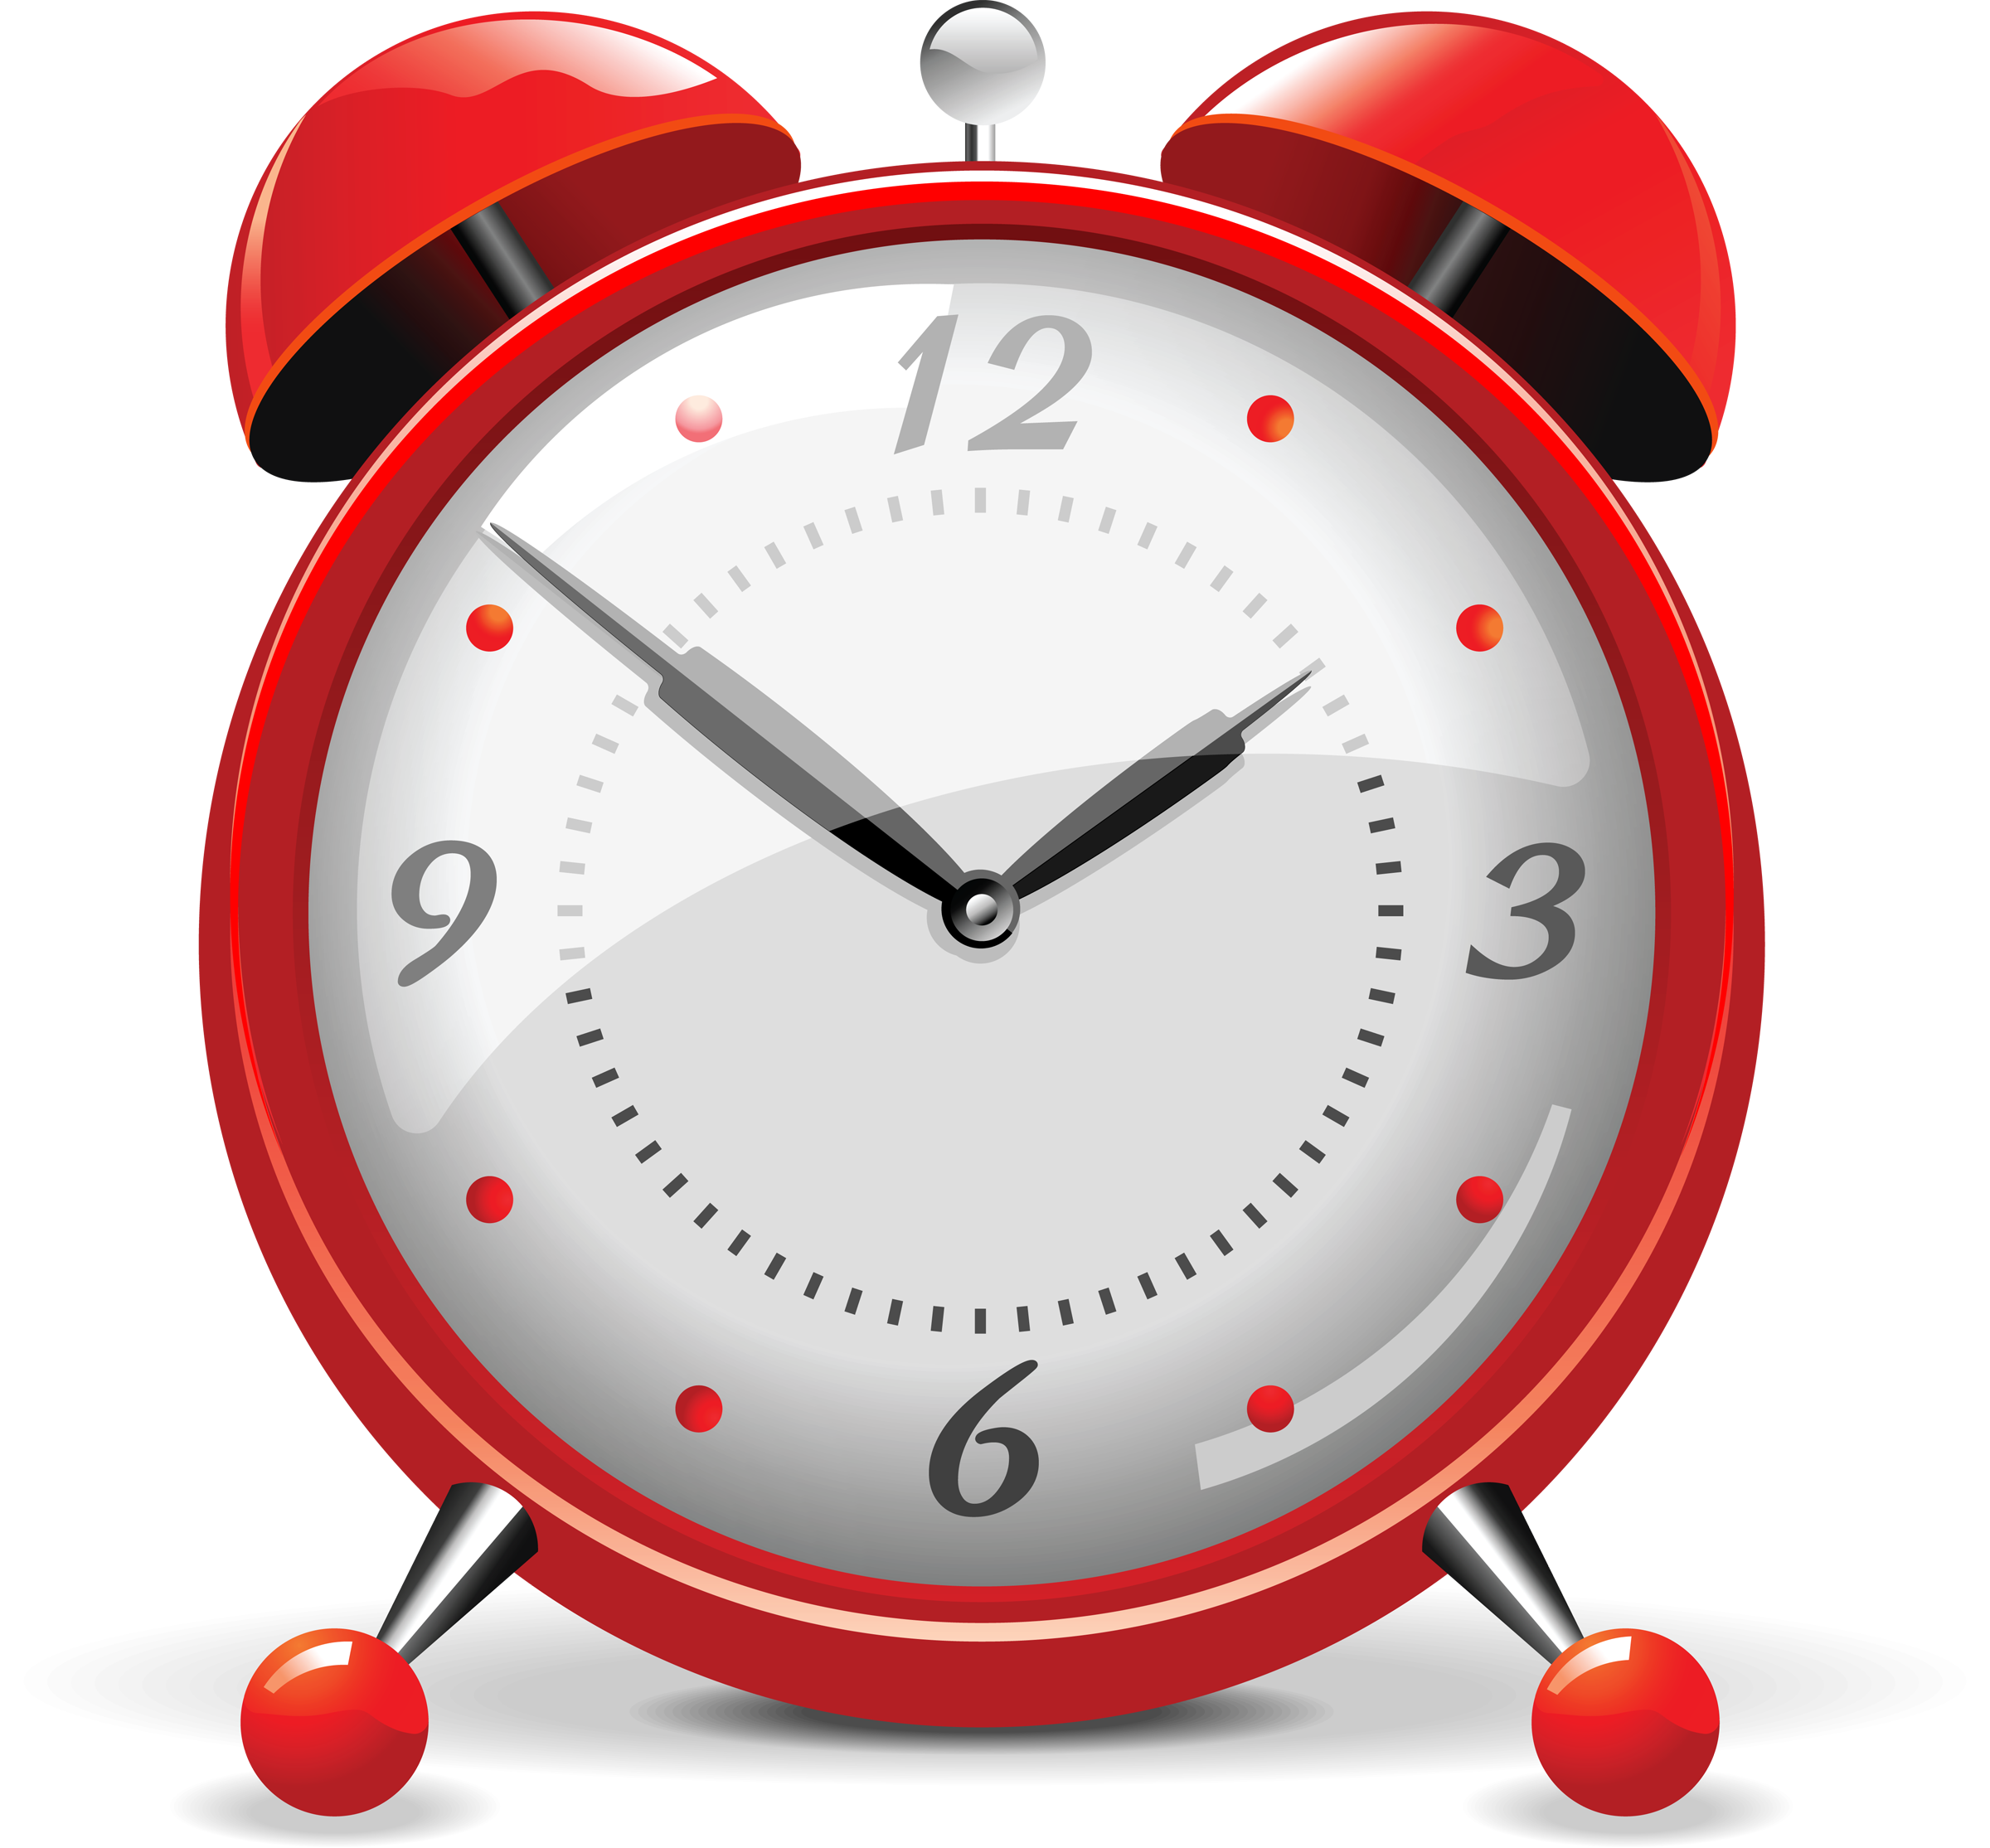 Free Clock Png, Download Free Clip Art, Free Clip Art on.